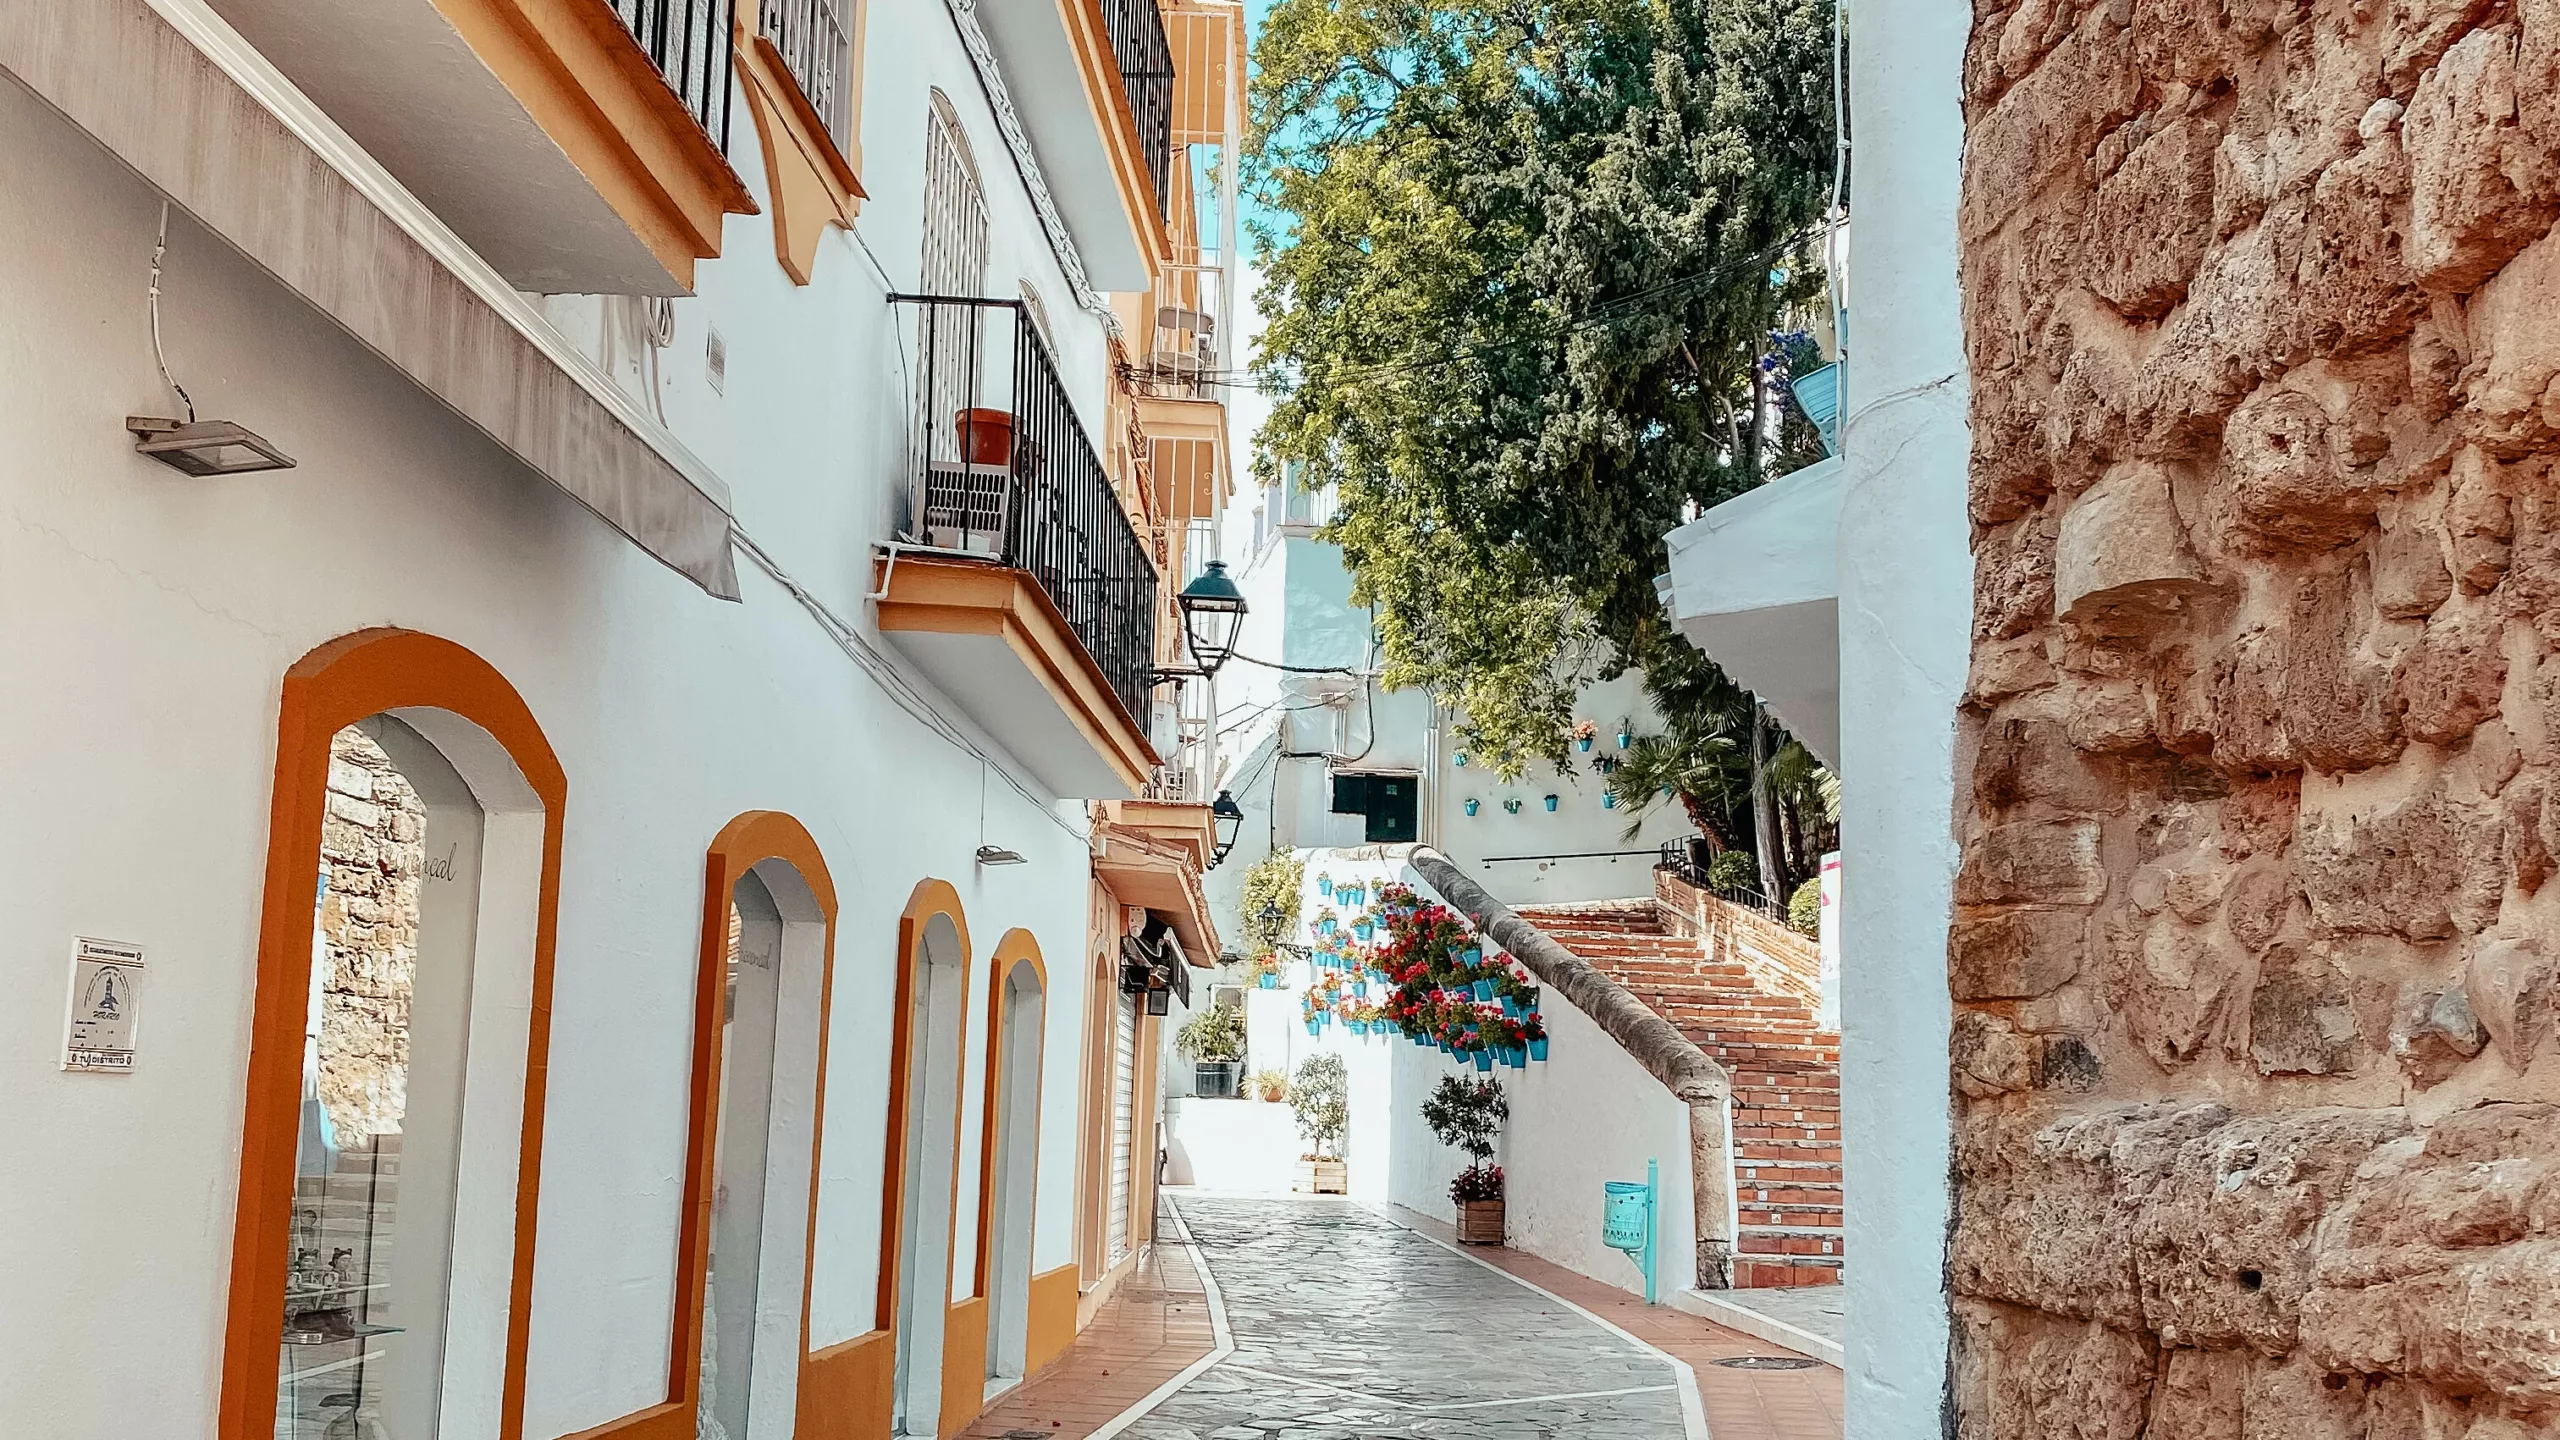 8 Best Tours in Marbella (& Free Things To Do), old town marbella